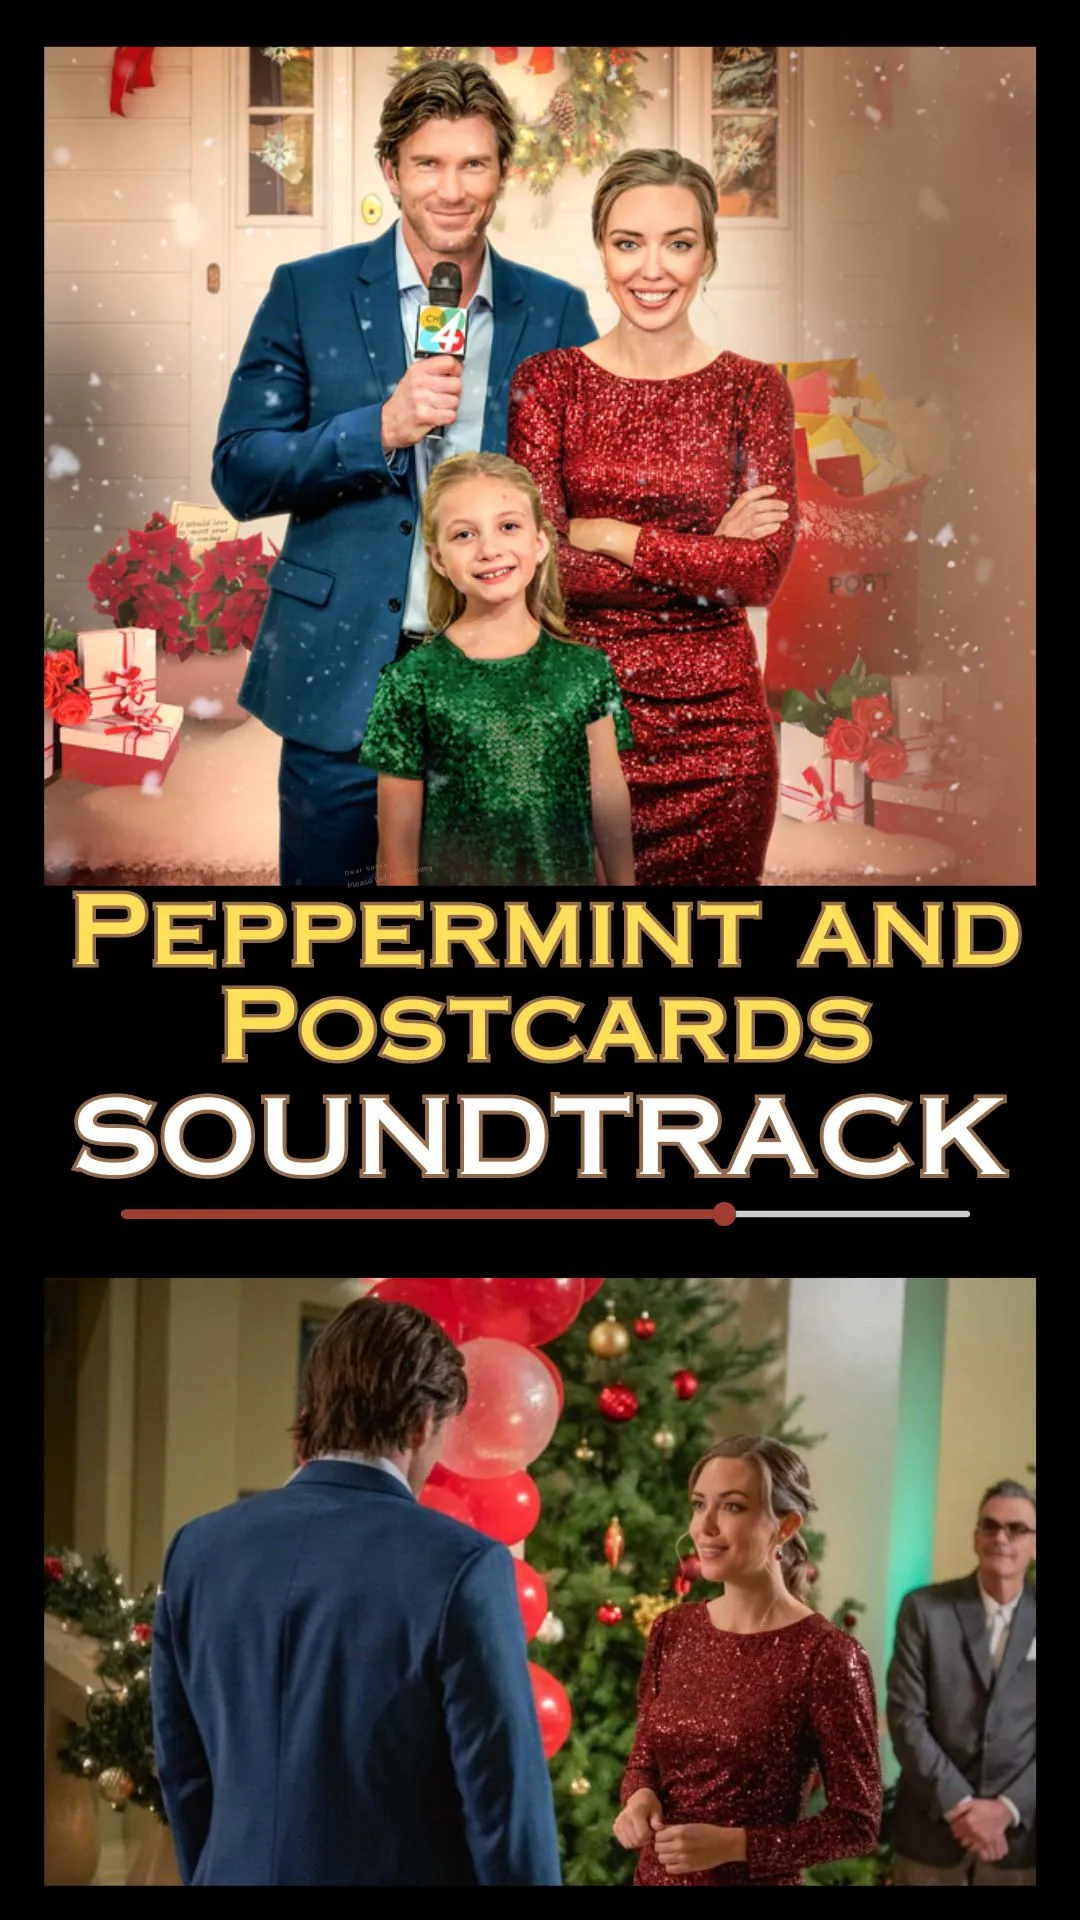 Peppermint and Postcards Soundtrack